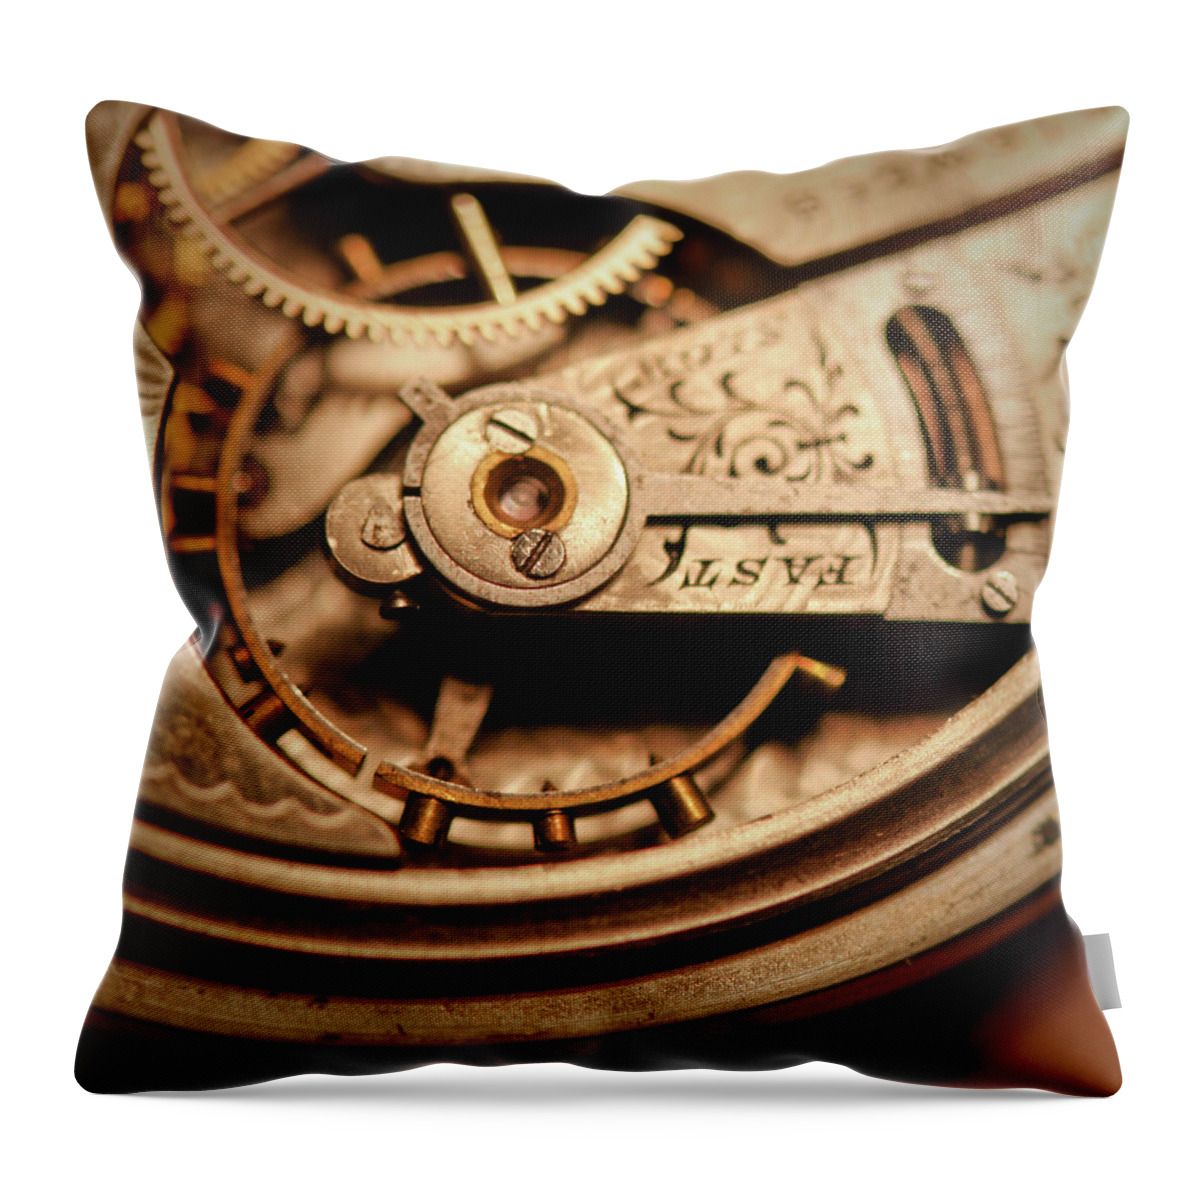 Michigan Throw Pillow featuring the photograph Exposing The Inner Workings And Gears by Rudy Malmquist